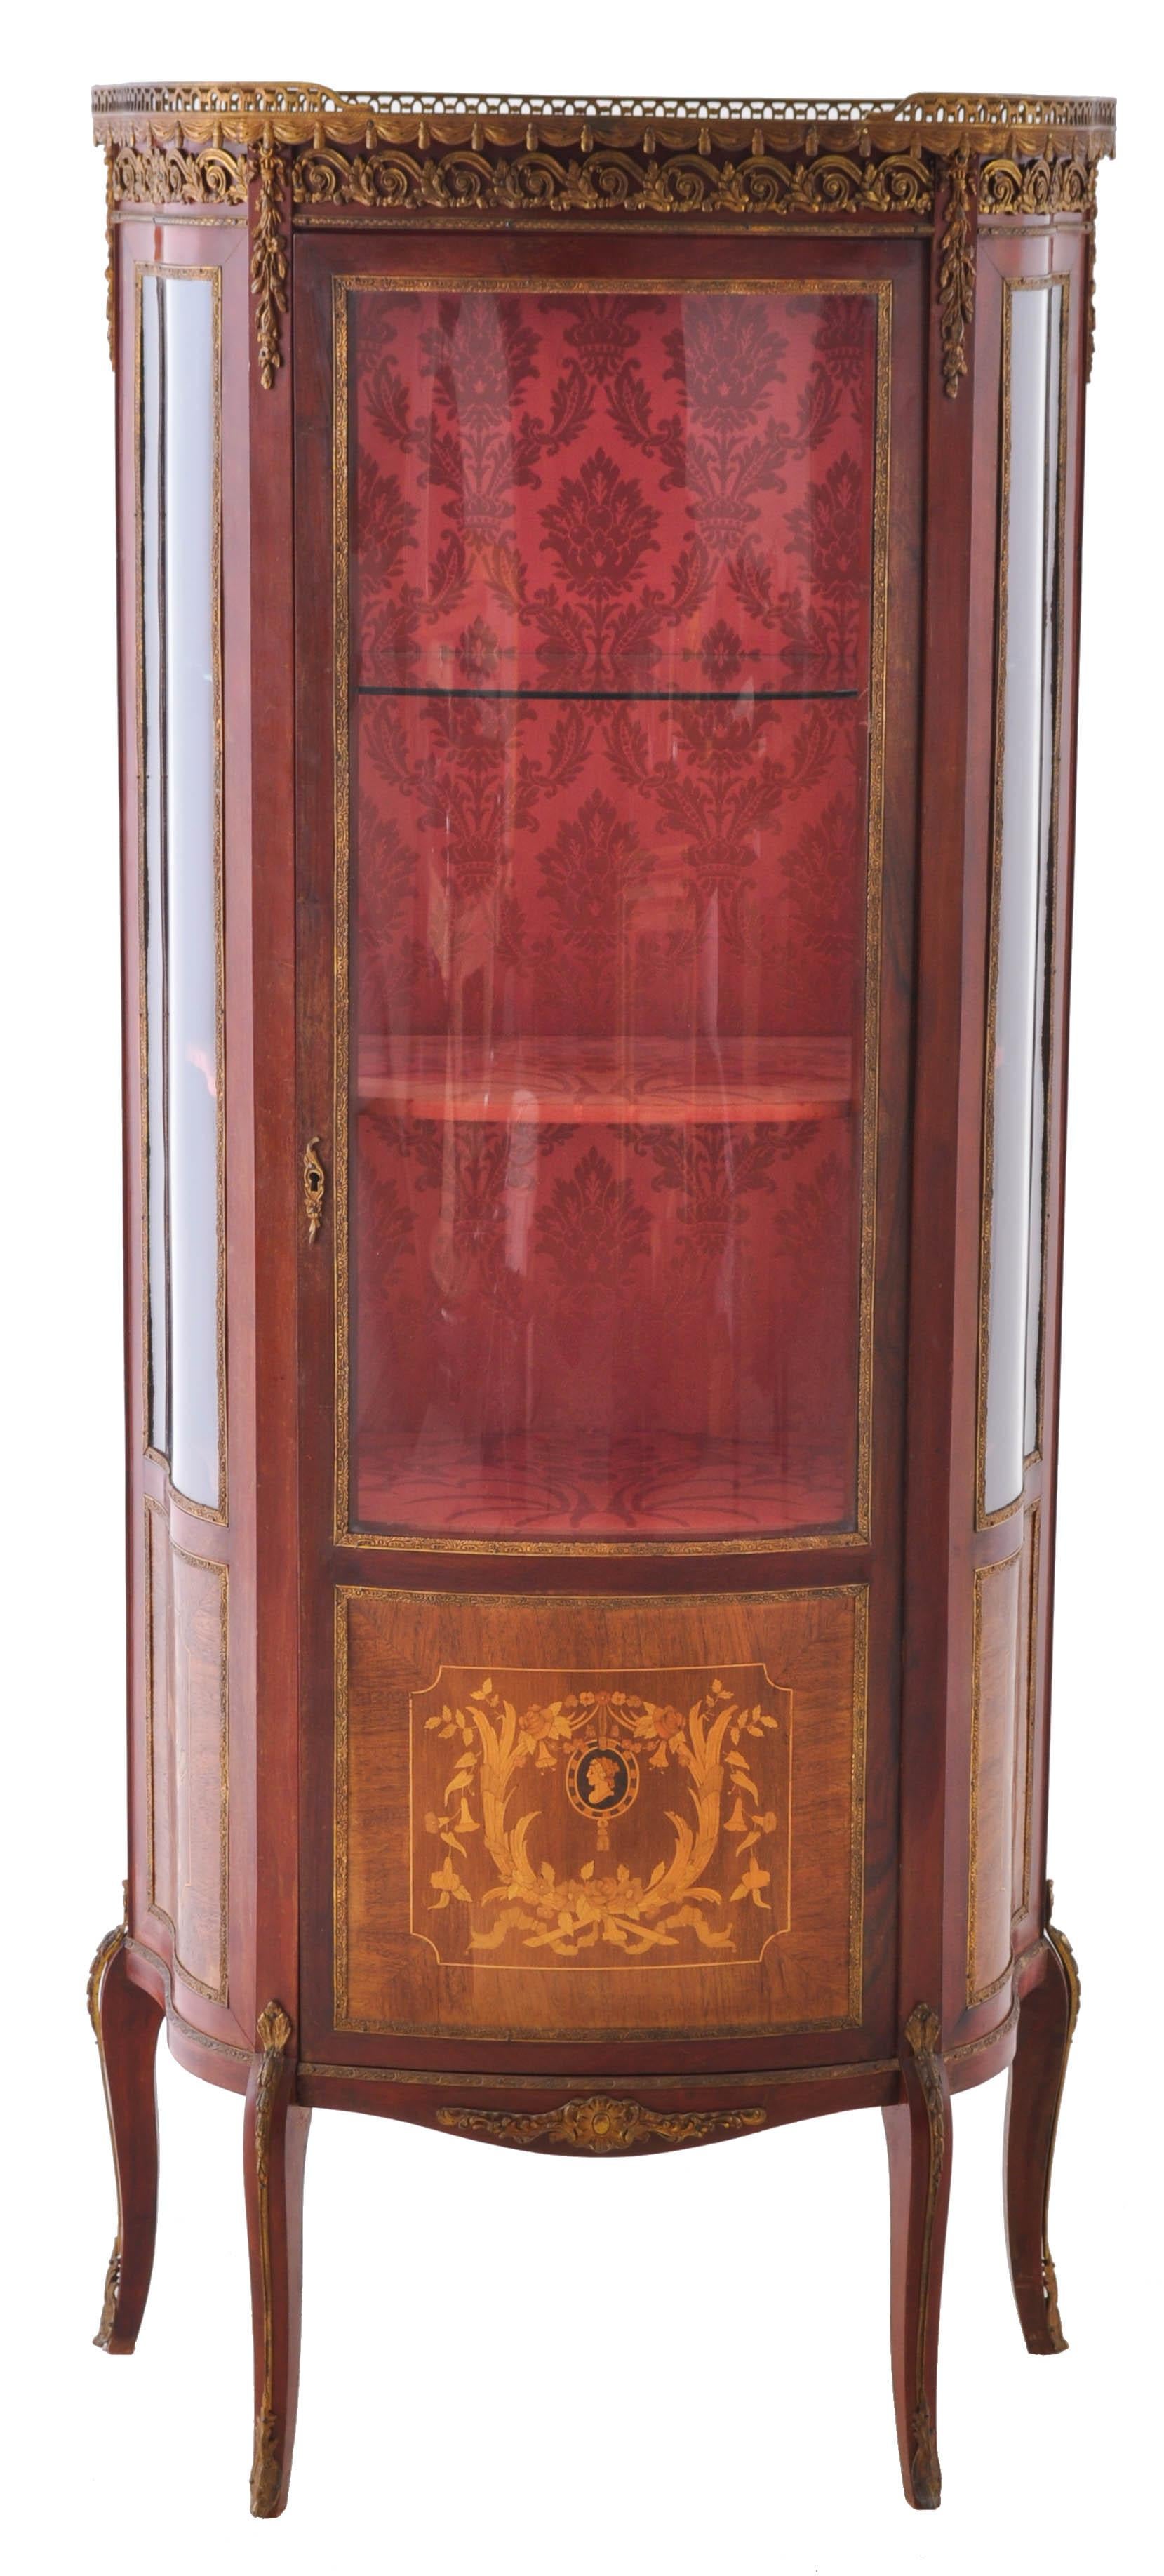 Antique Louis XV style Vernis Martin China display cabinet/Vitrine, circa 1900. The cabinet having a pierced brass gallery to the top and a brass frieze below with hanging floral garlands. The sides of the cabinet having serpentine shaped glass with